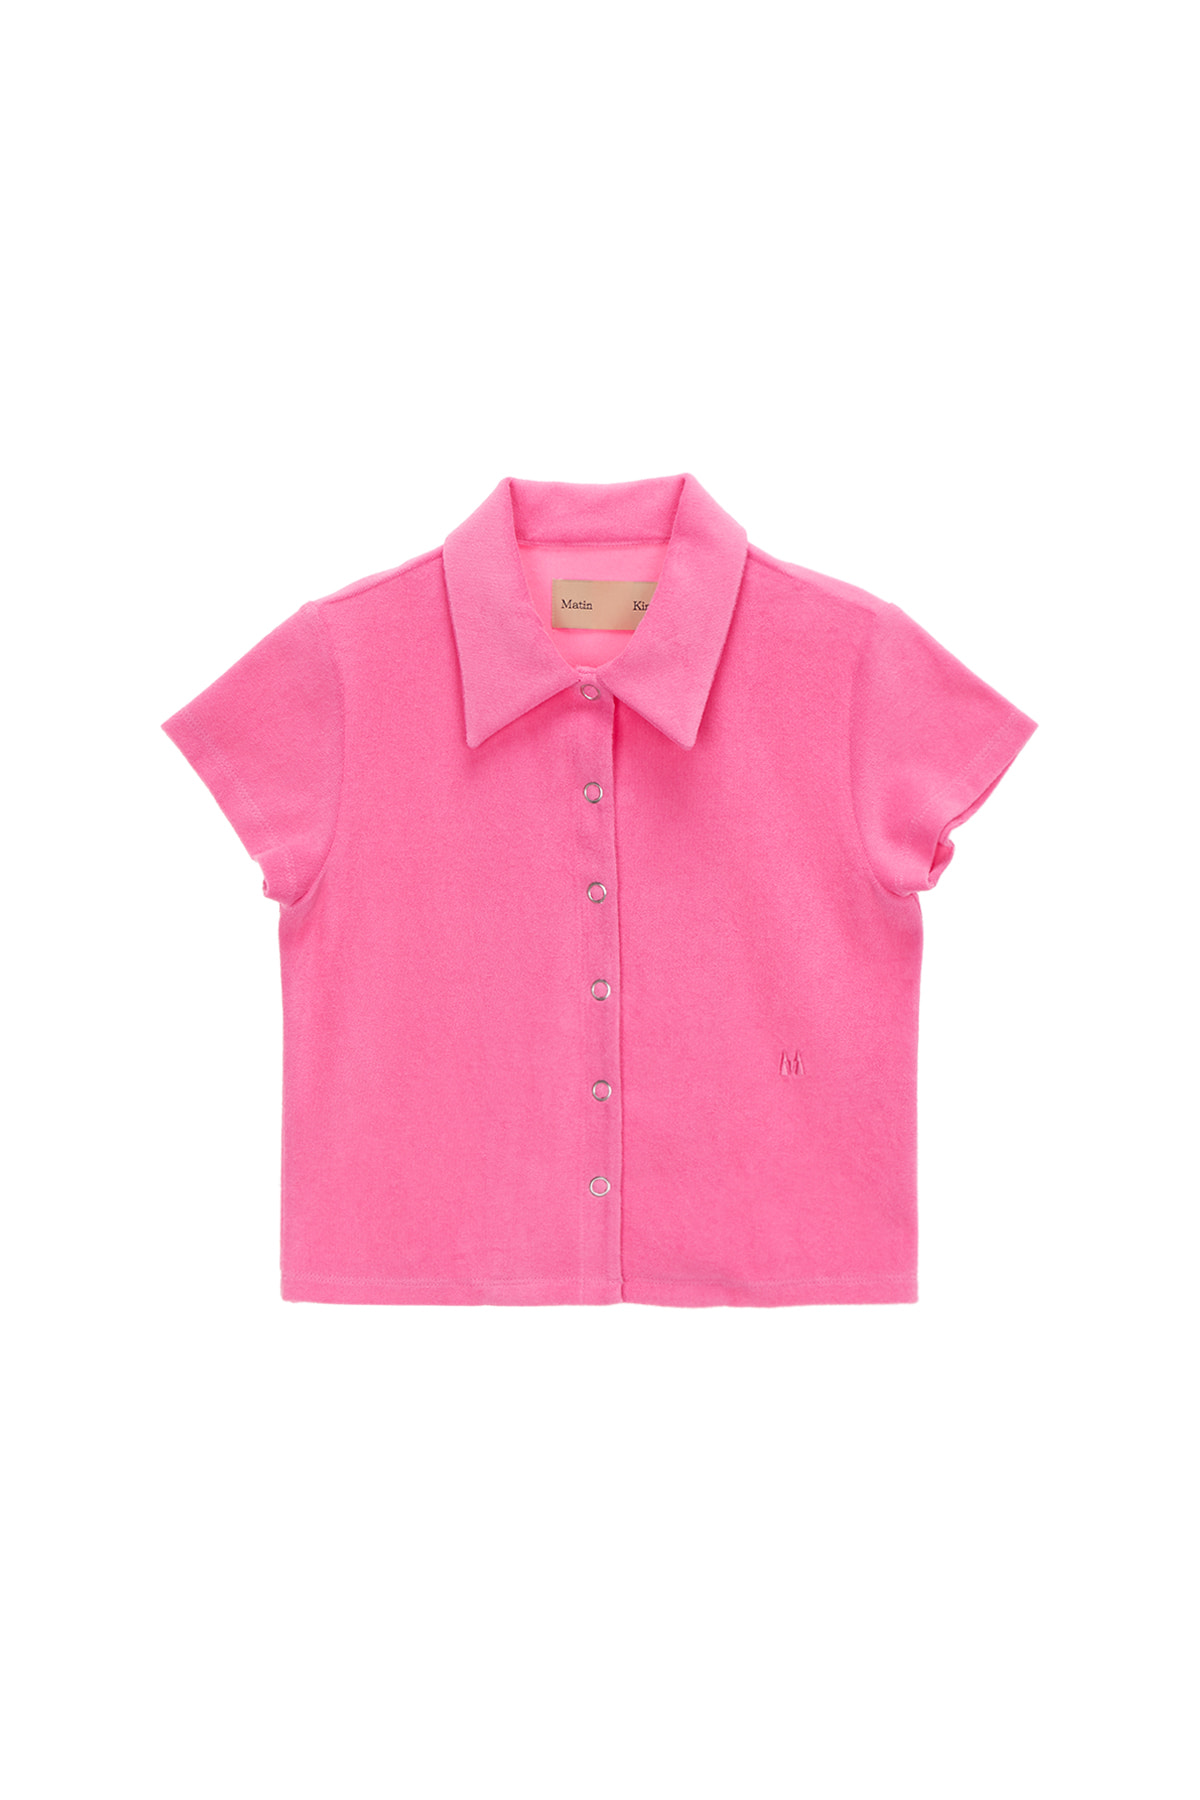 SOFT TOUCH HALF SHIRT TOP IN PINK